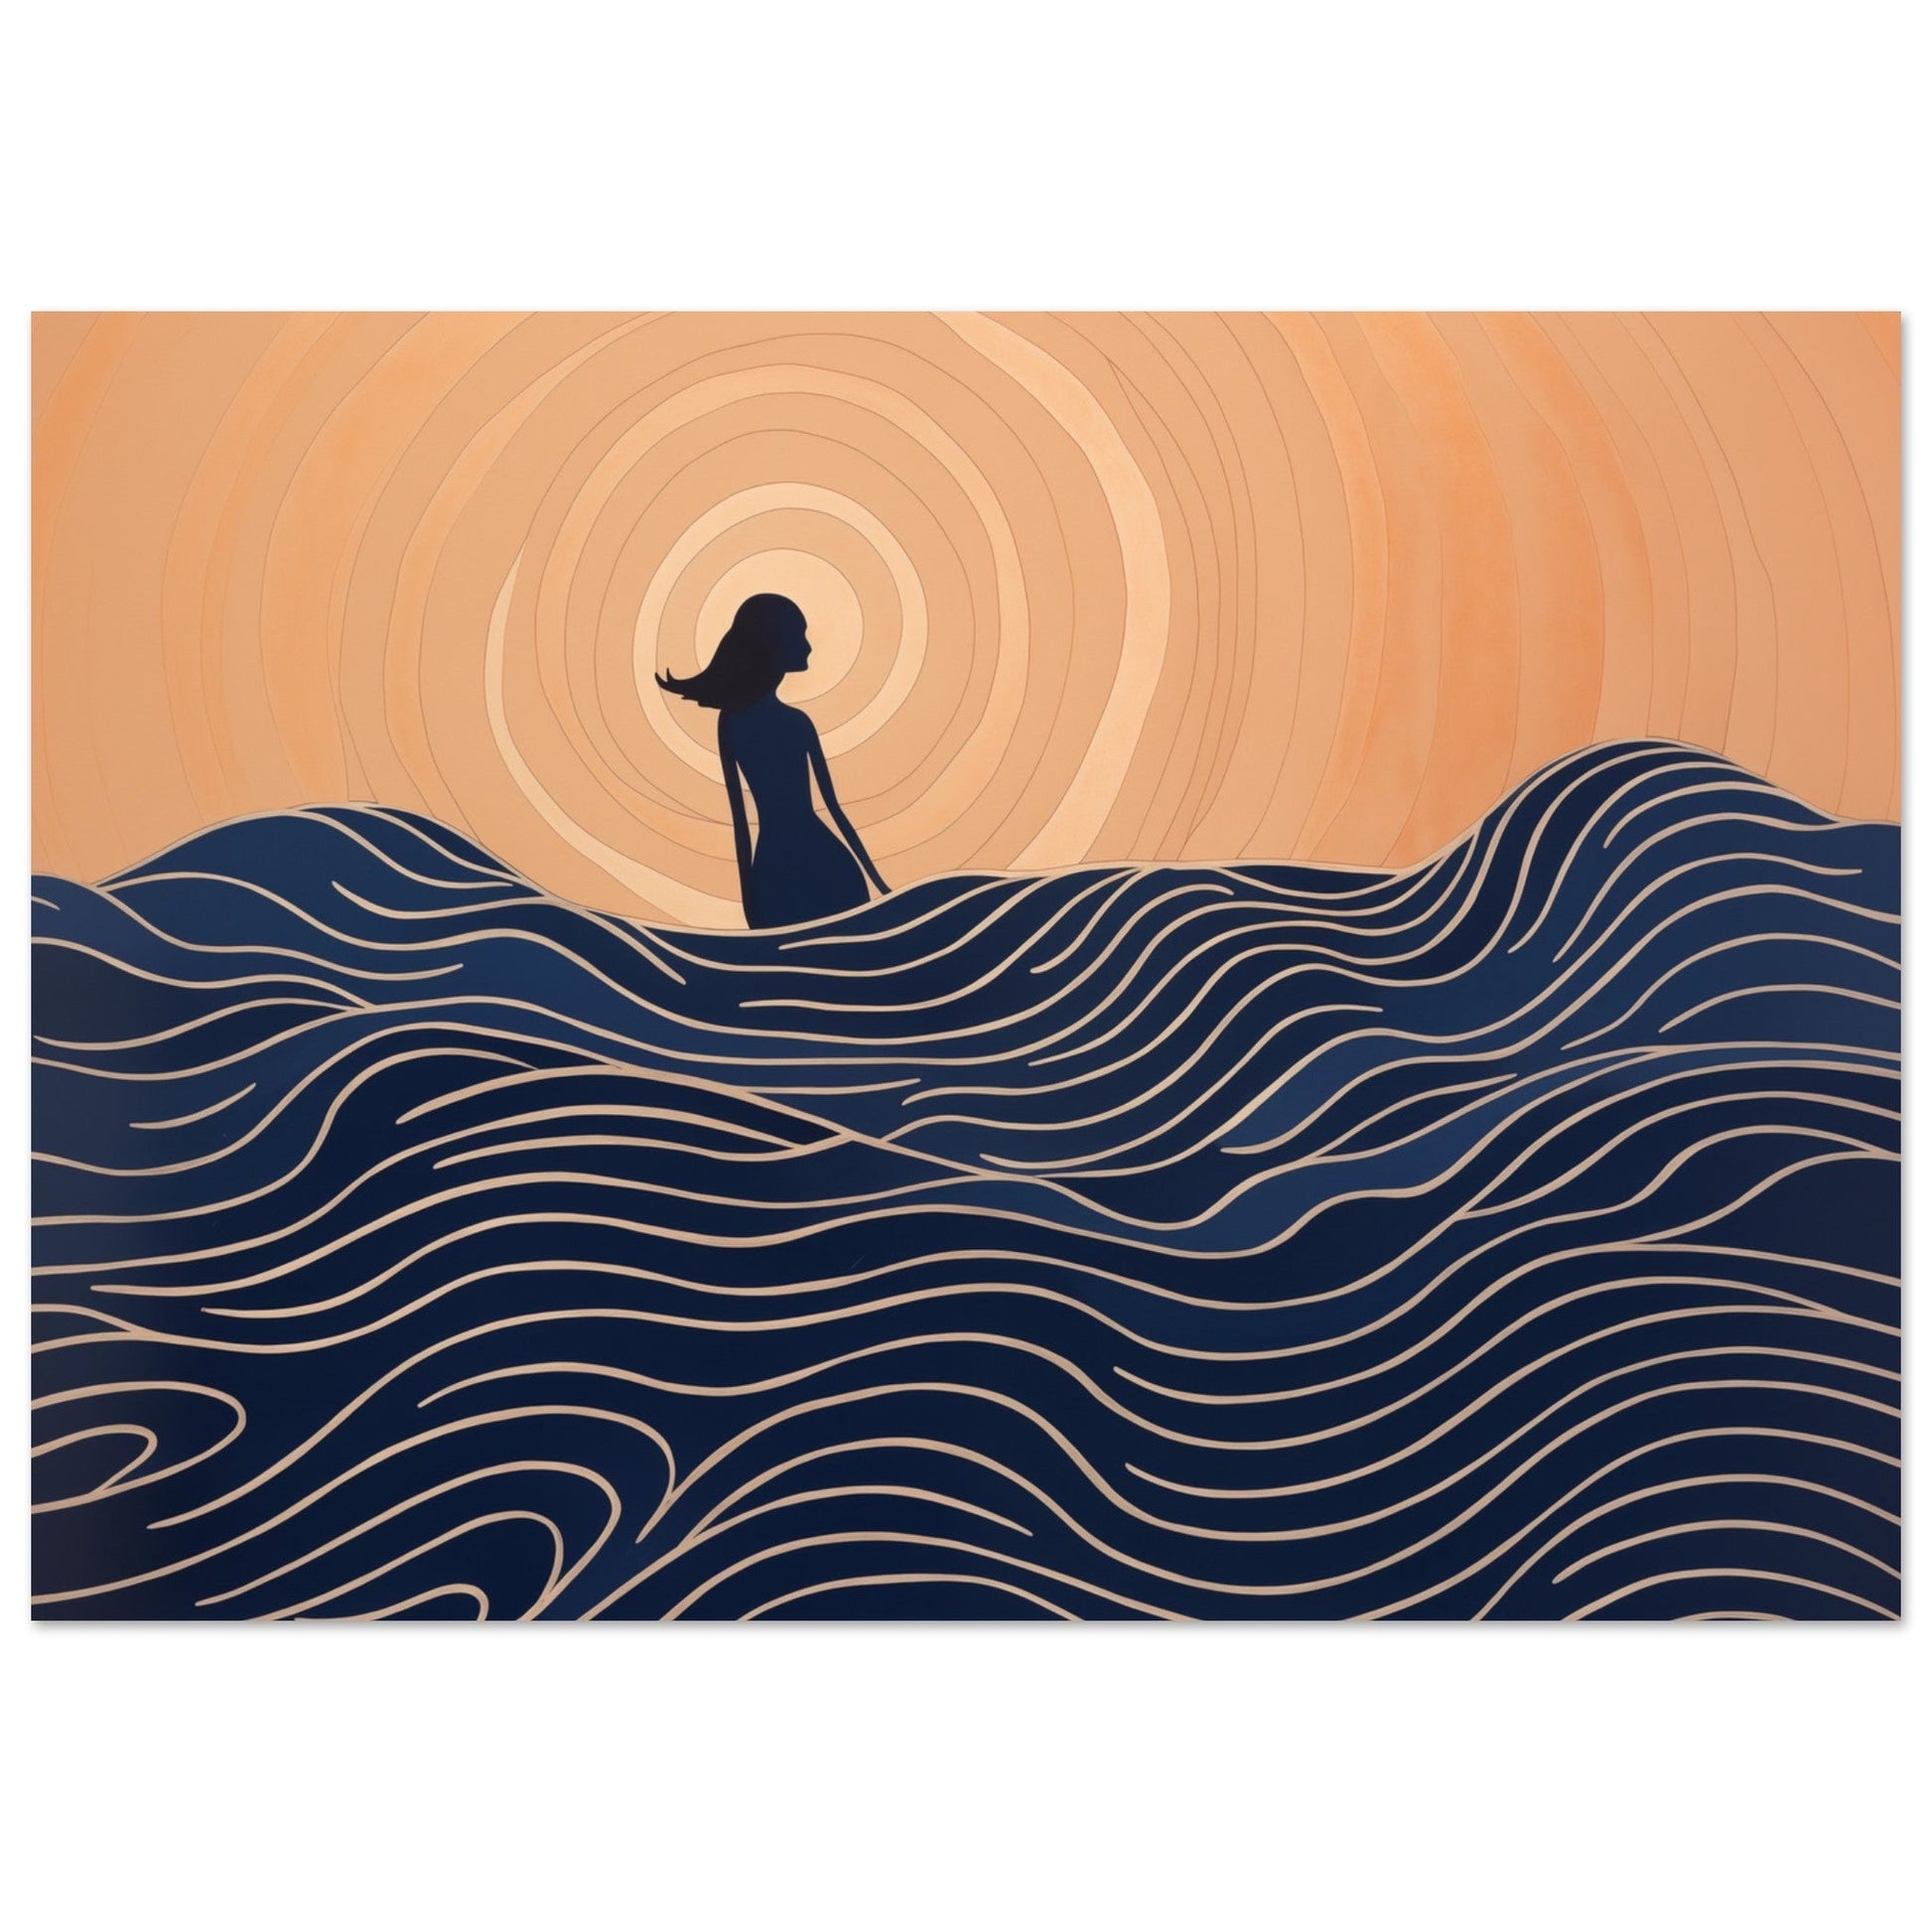 A stunning colored wall art featuring Serenity Amidst the Swell, a silhouette of a woman in the ocean, with breathtaking waves in the background.